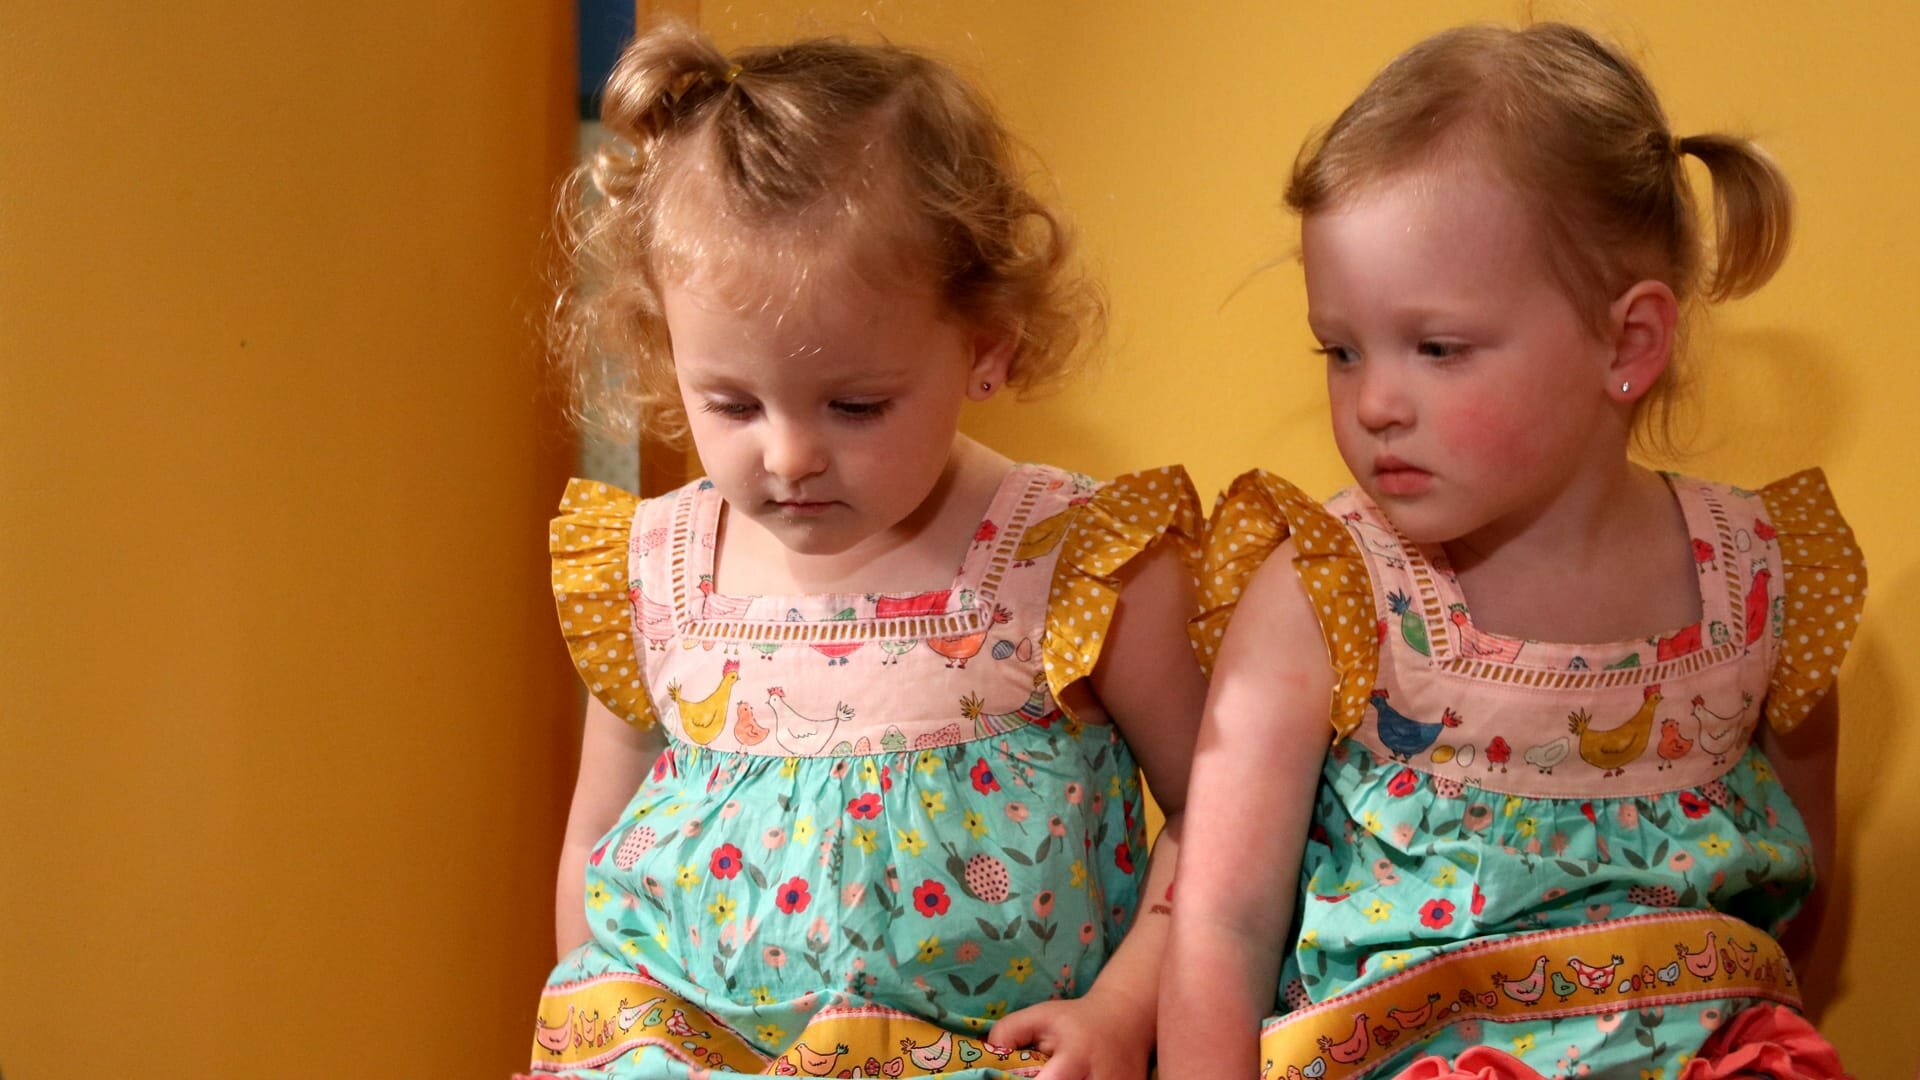 Outdaughtered S4E11 Every Quint for Herself